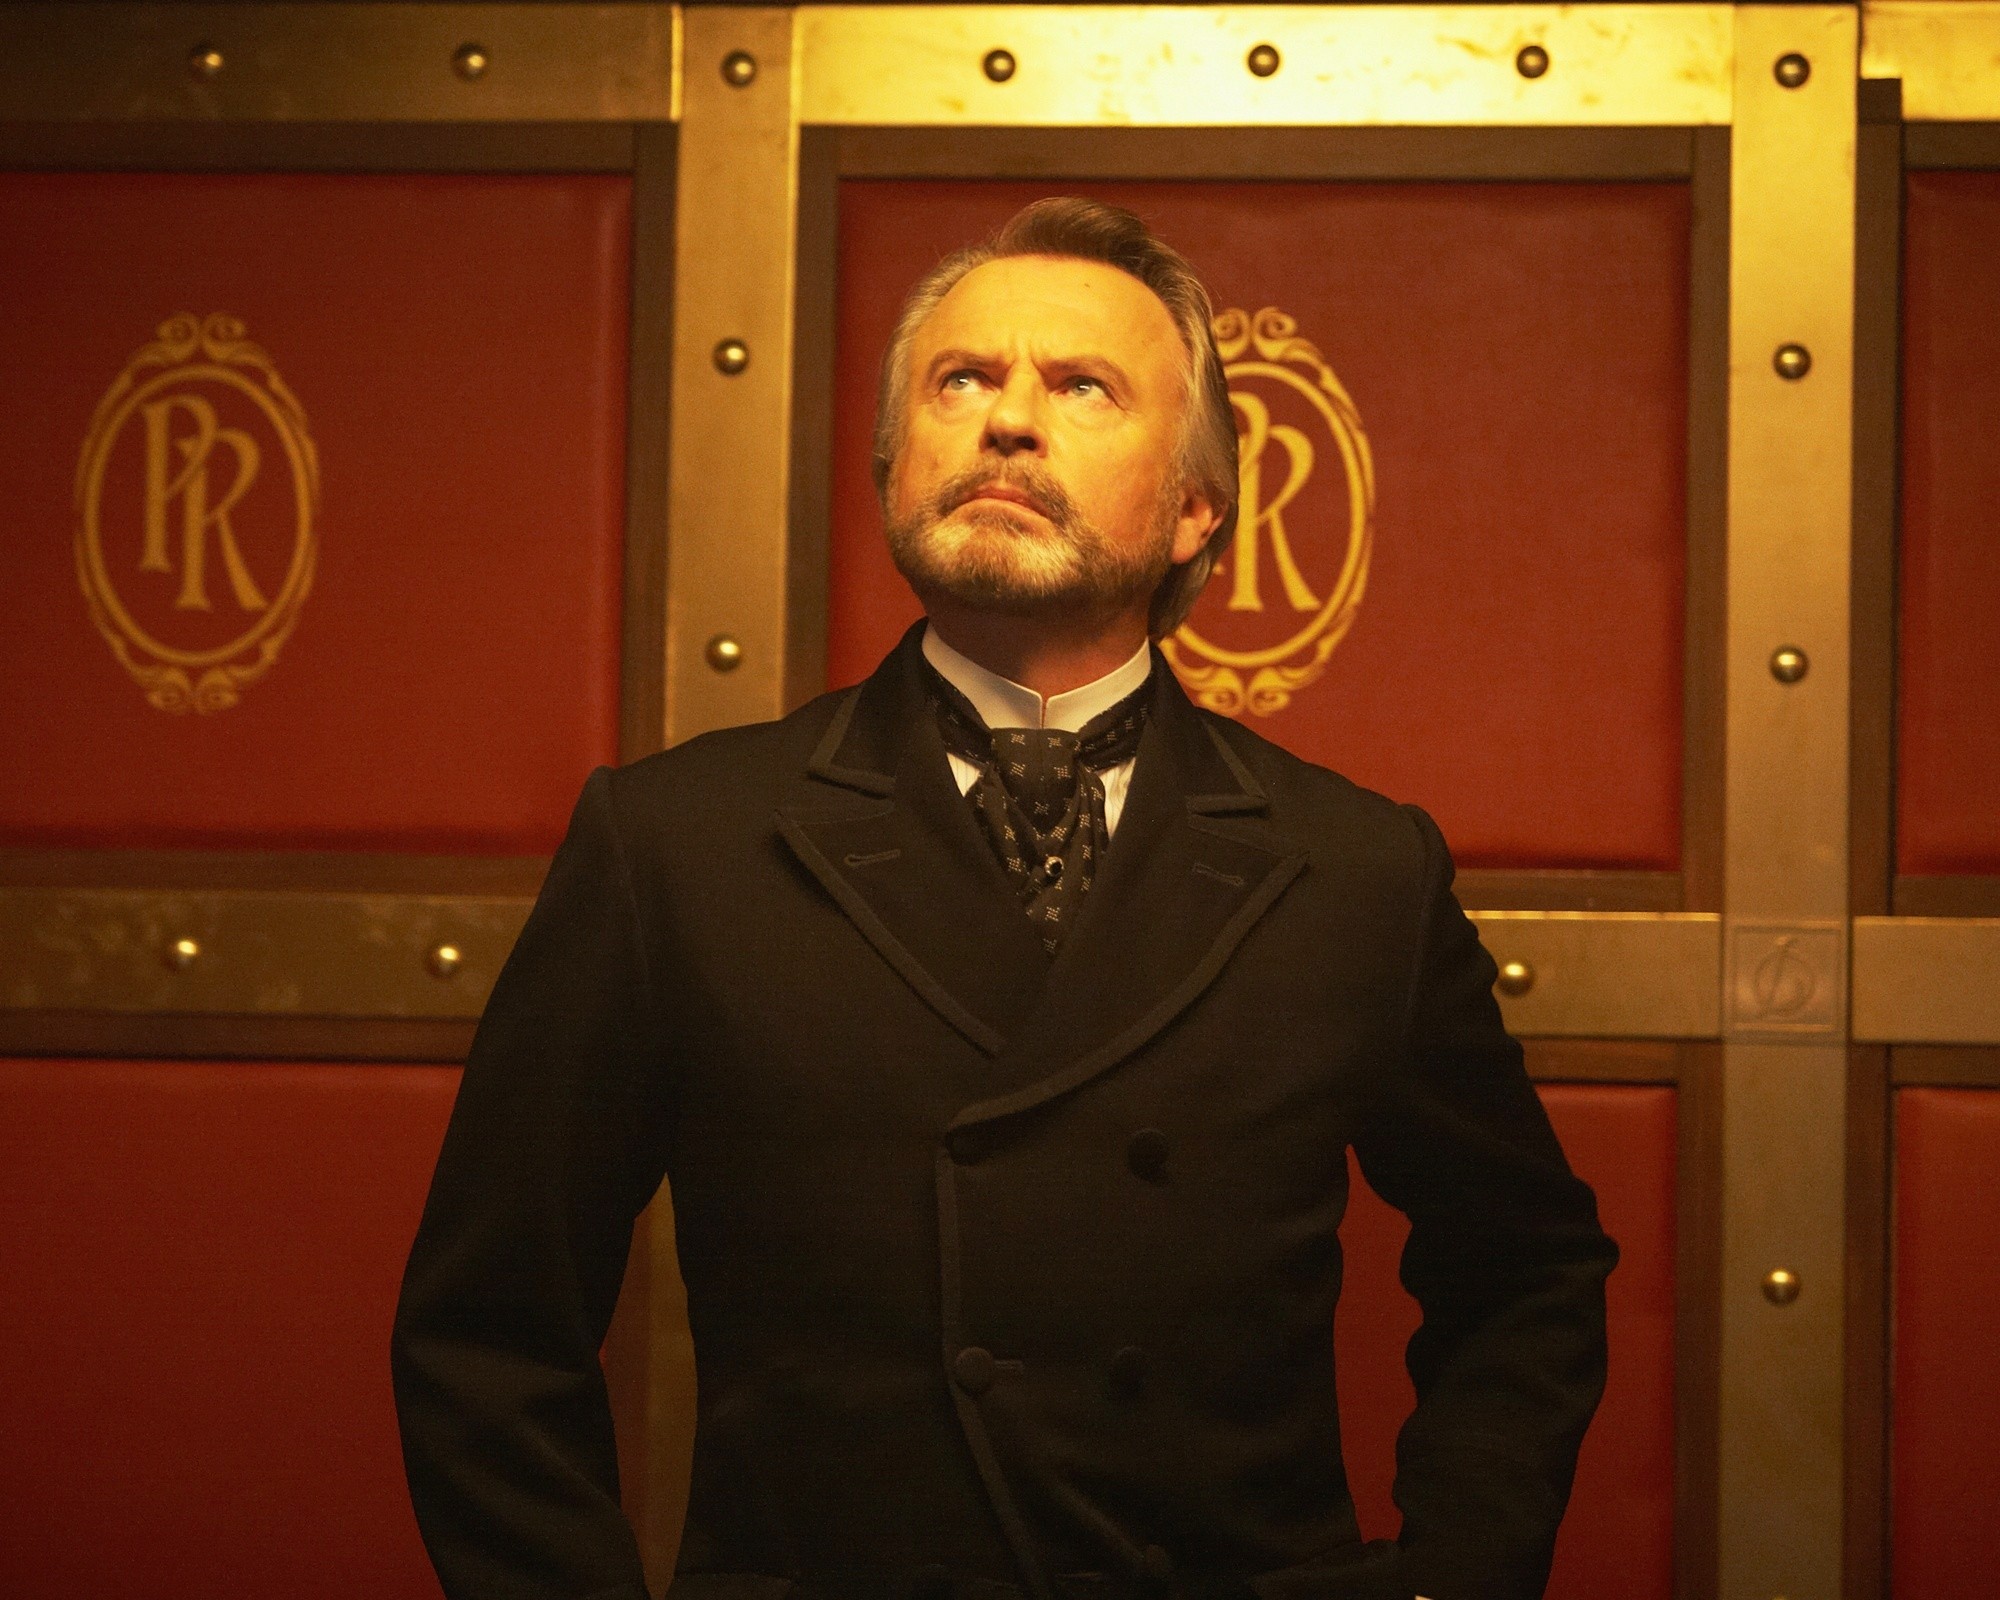 Sam Neill stars as Otto Luger in Image Entertainment's The Adventurer: The Curse of the Midas Box (2014)